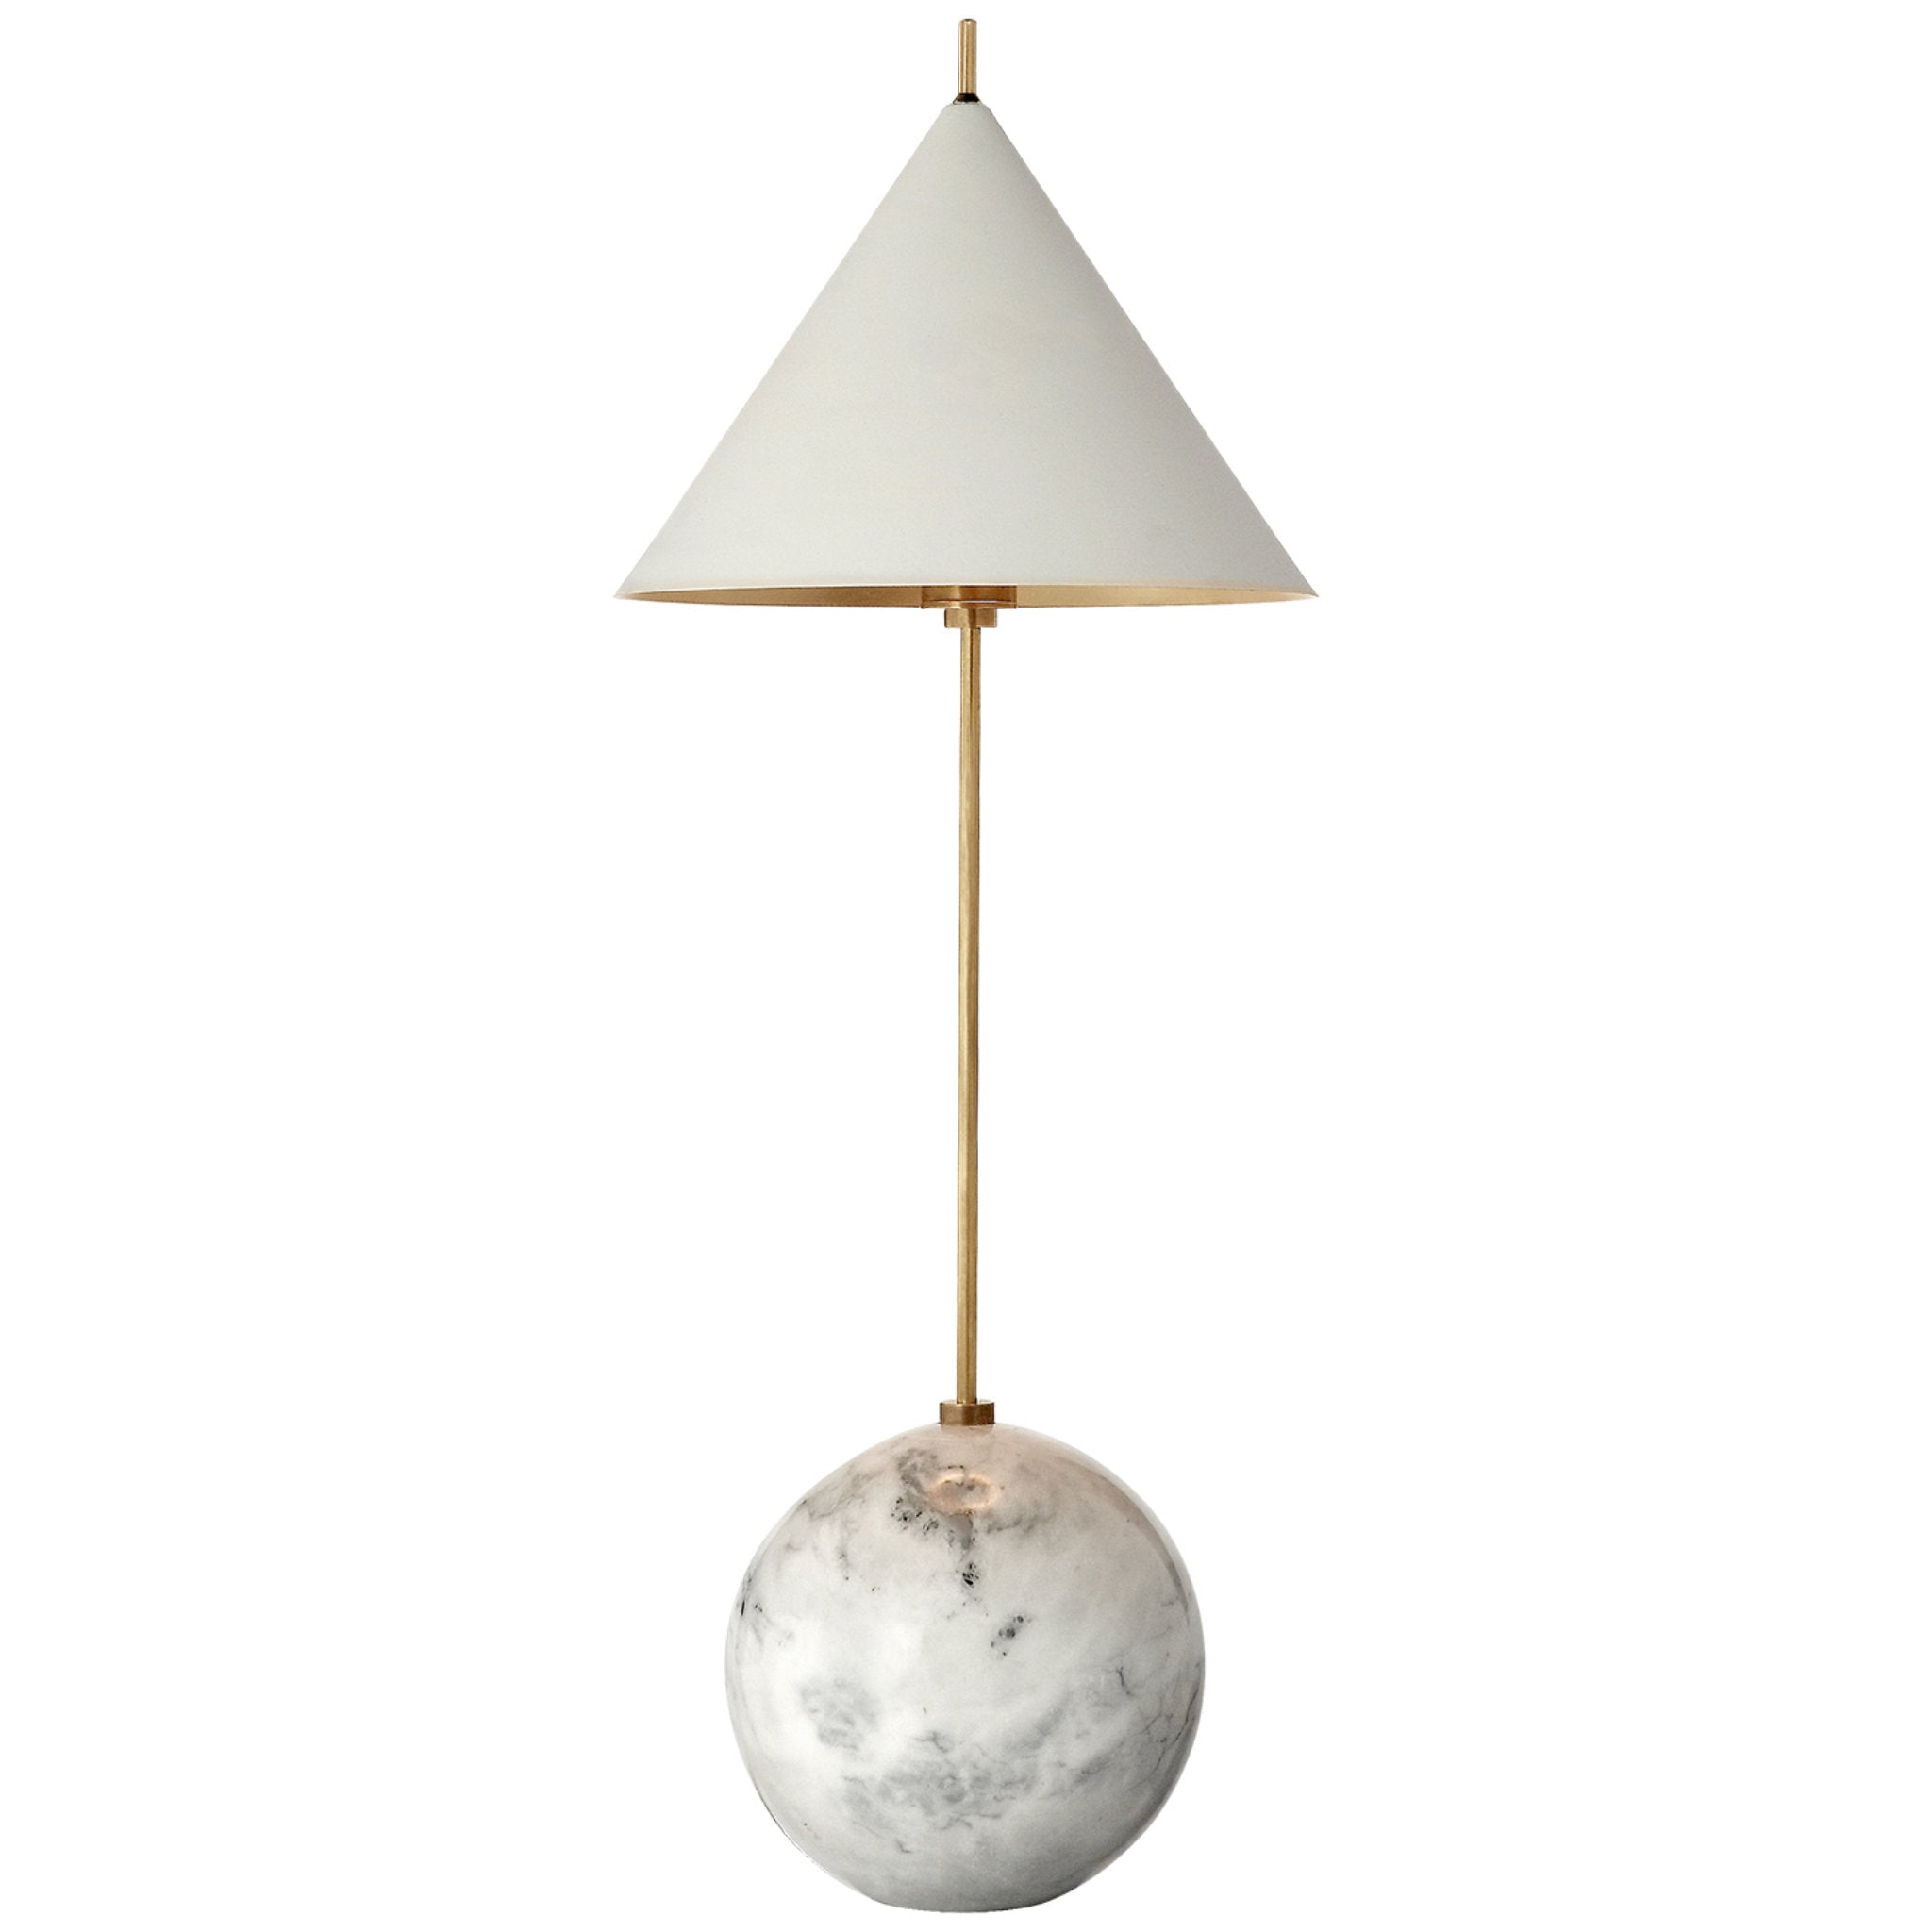 Kelly Wearstler Cleo Orb Base Accent Lamp in Antique-Burnished Brass with Antique White Shade